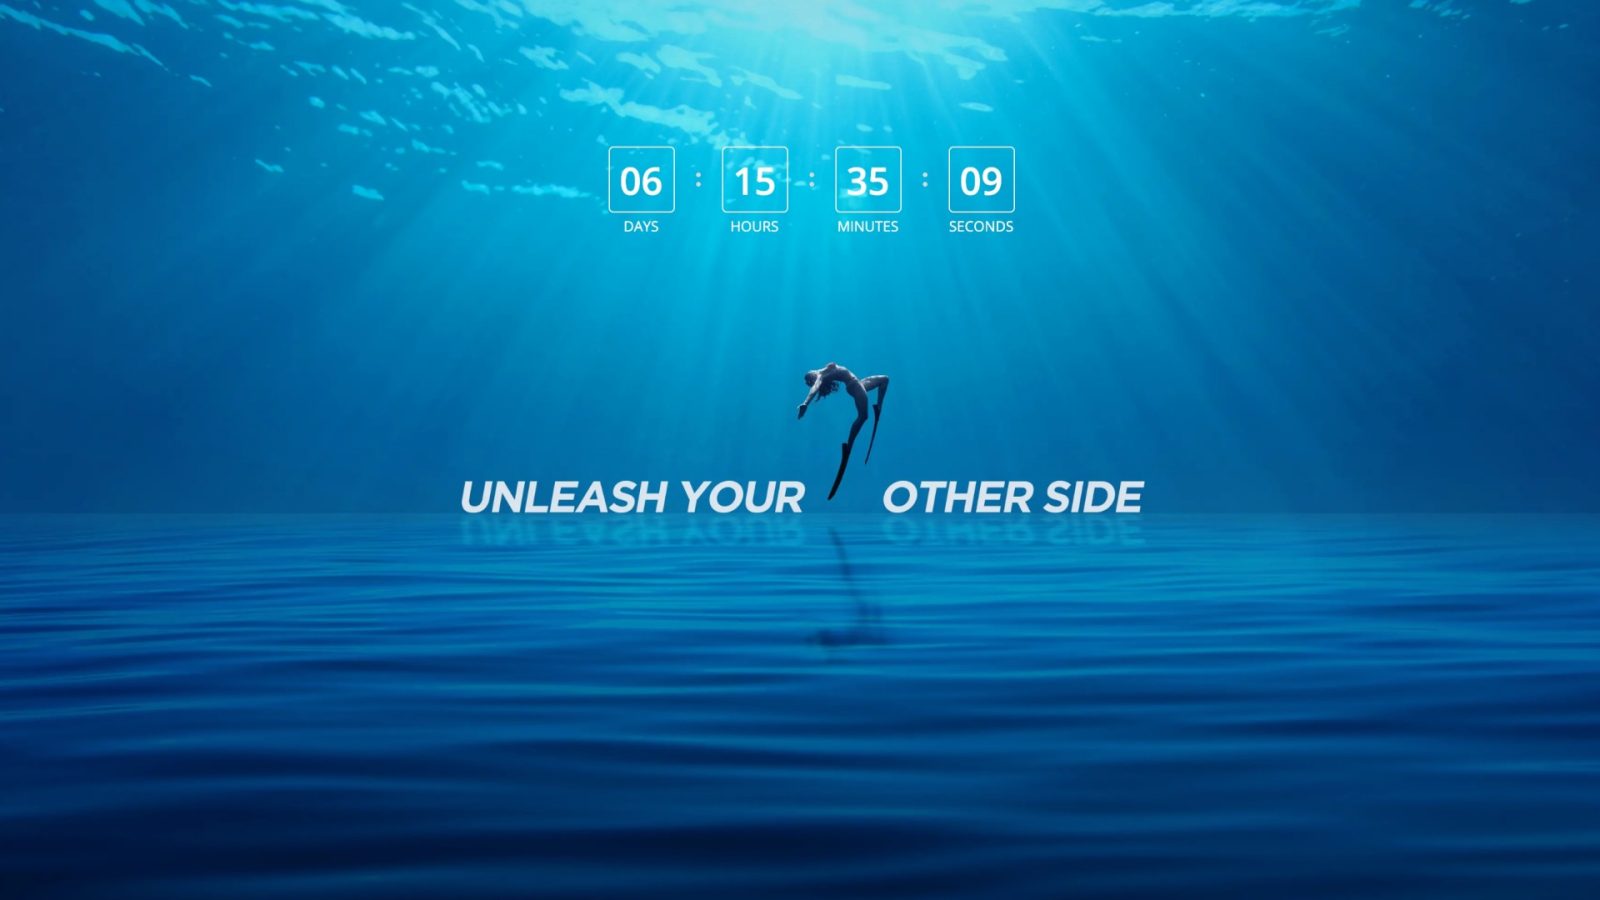 DJI-announcement-Unleash-your-other-side-for-May-15th.jpg